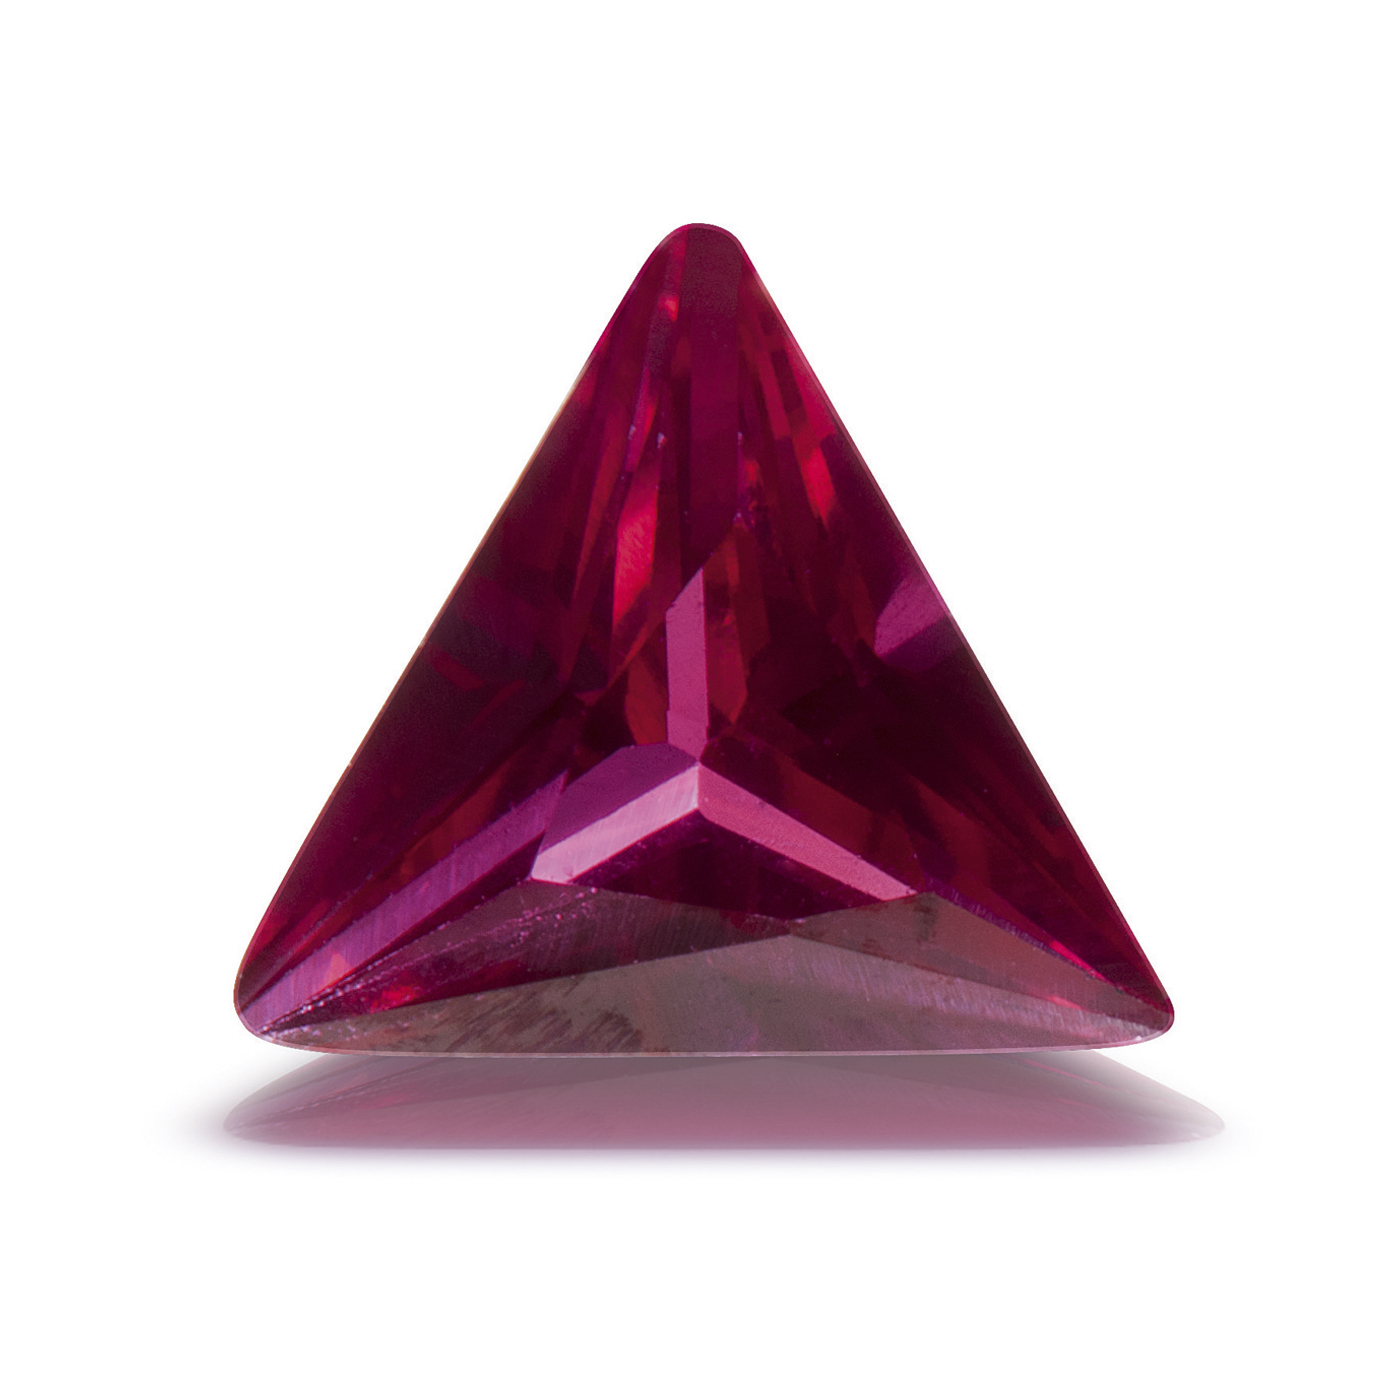 Zirconia, Triangular, Ruby Red, Faceted, 3.00 mm - 5 pieces